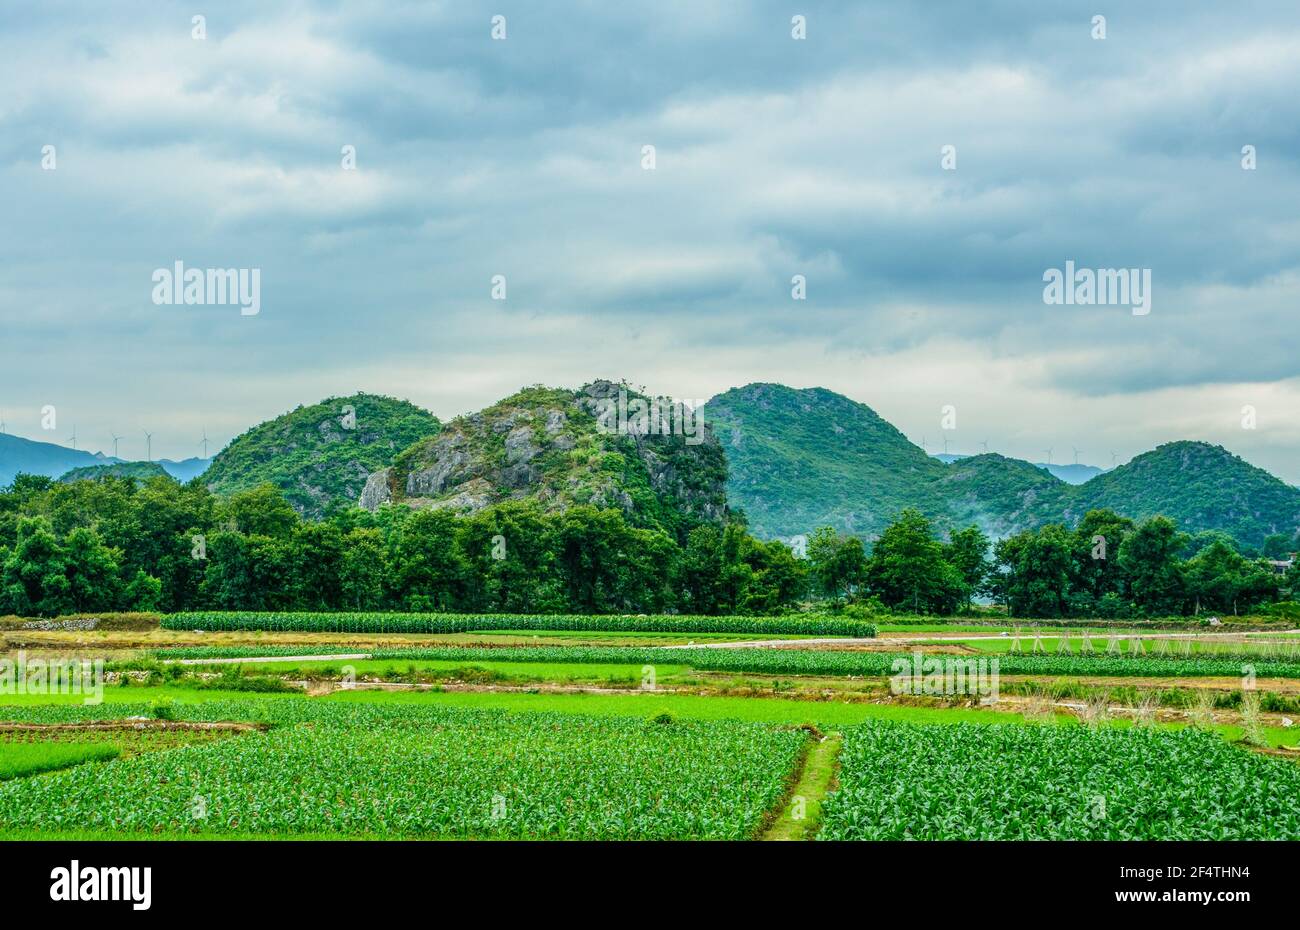 Countryside scenery in spring Stock Photo